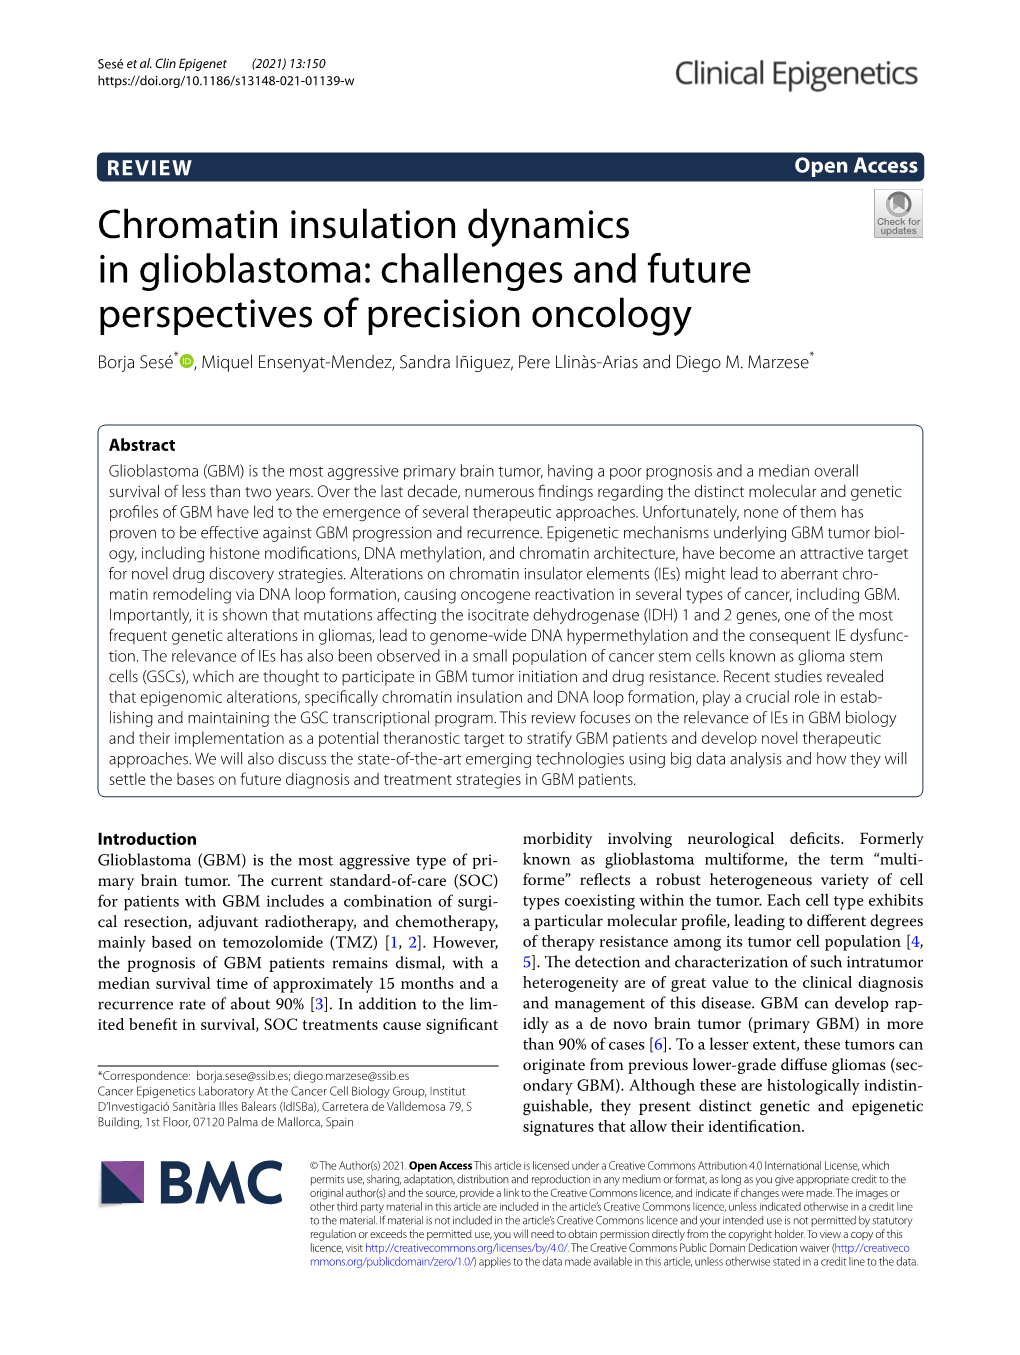 Chromatin Insulation Dynamics in Glioblastoma: Challenges and Future